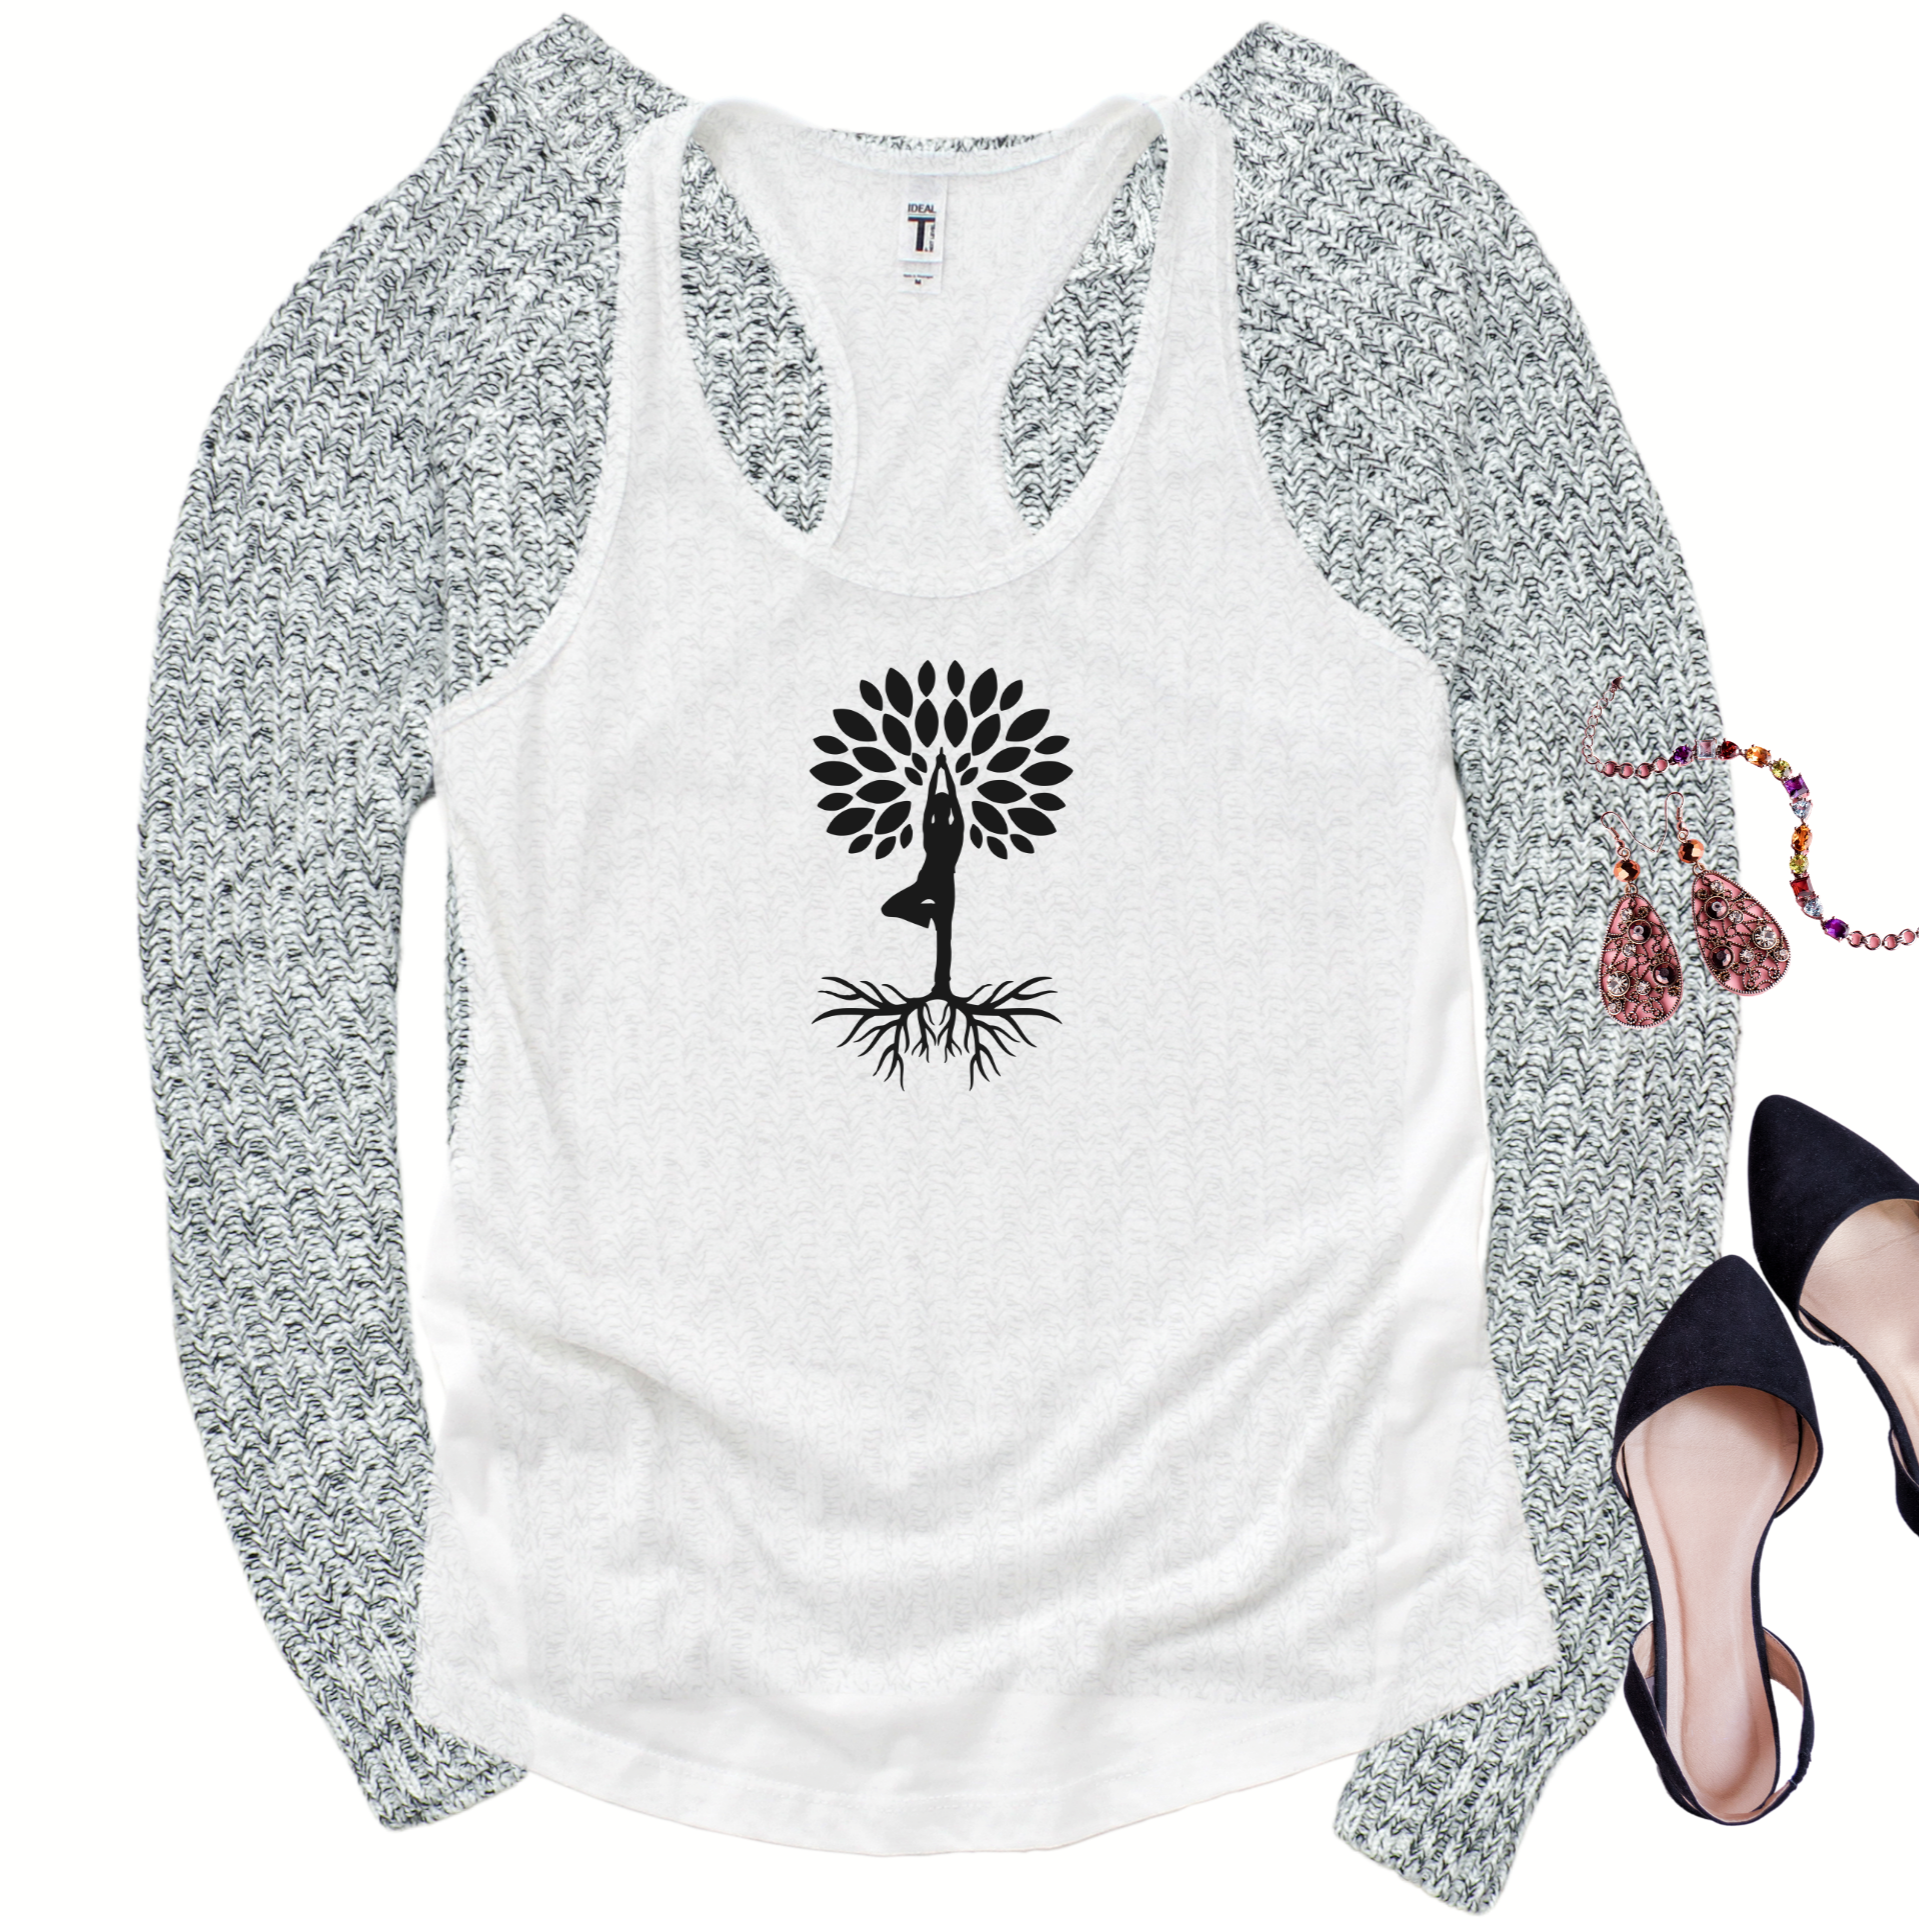 White Next Level 1533 racerback tank with a silhouette of a yoga tree pose with roots and leaves surrounding above in black.